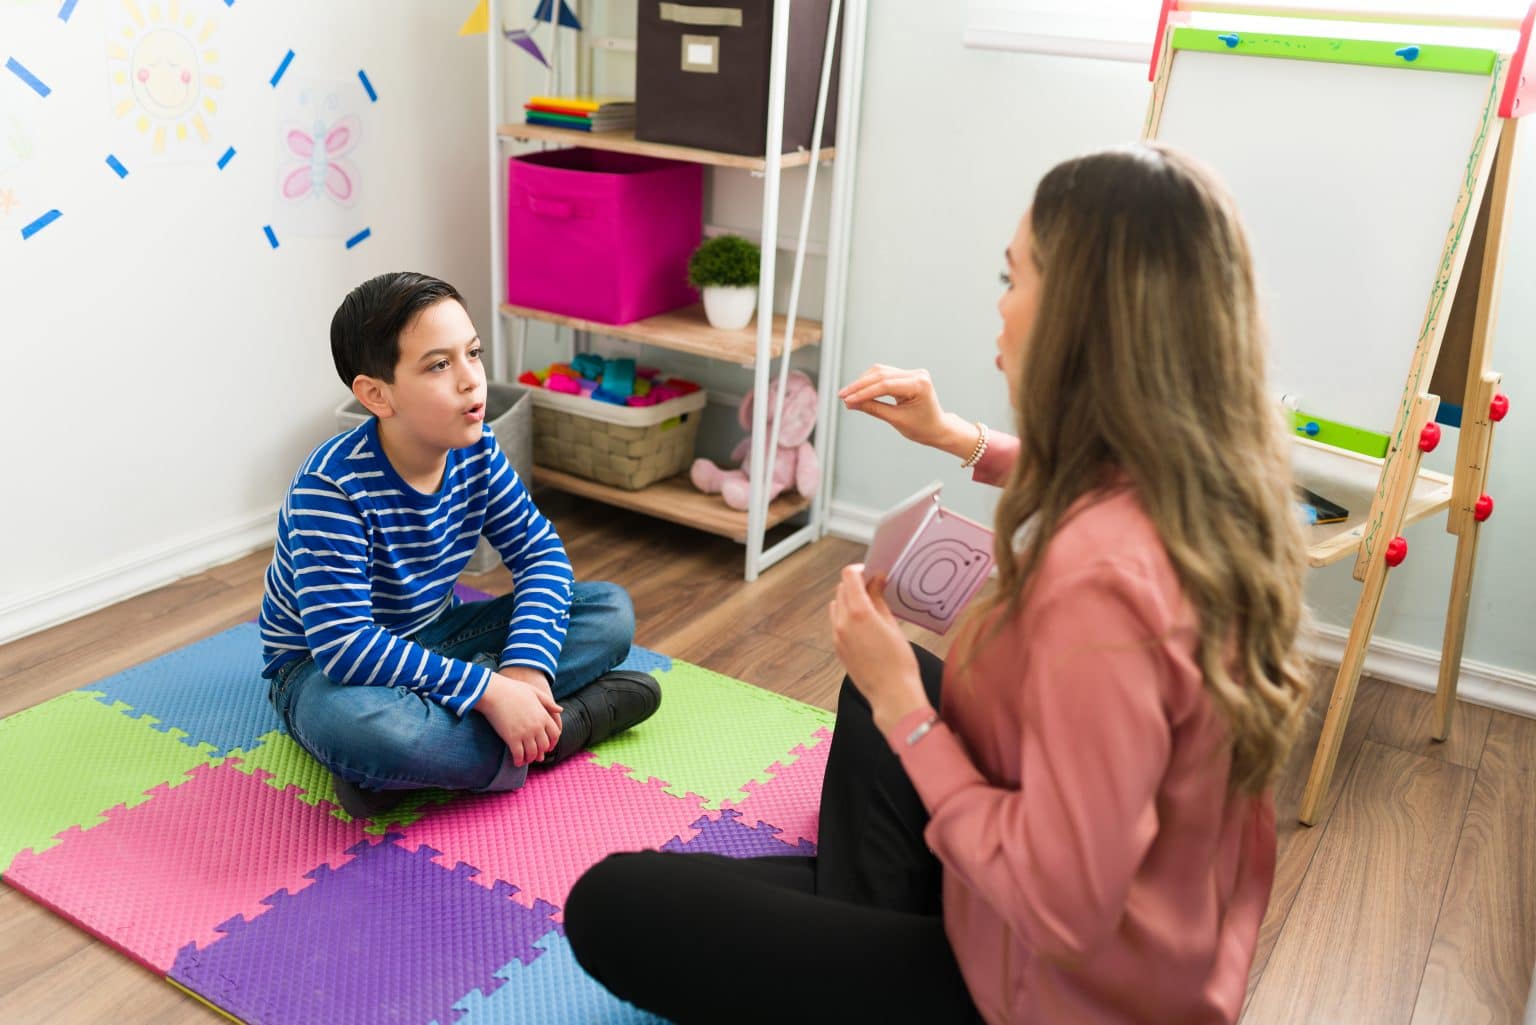 Speech pathologist helping a child through auditory verbal therapy